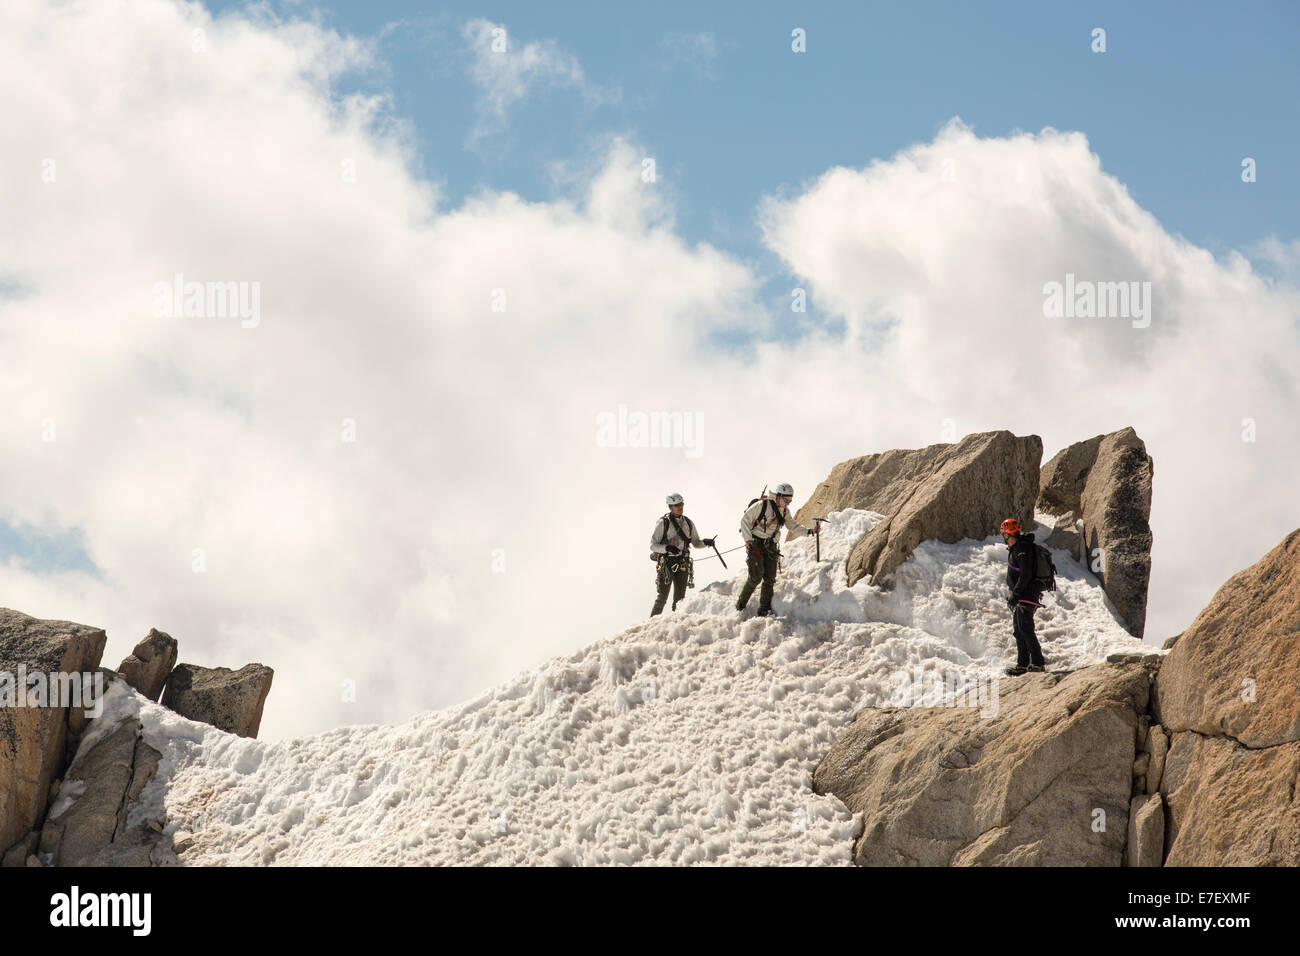 Climbers on the Cosmiques Arete on the Aiguille du Midi above Chamonix, France. Stock Photo